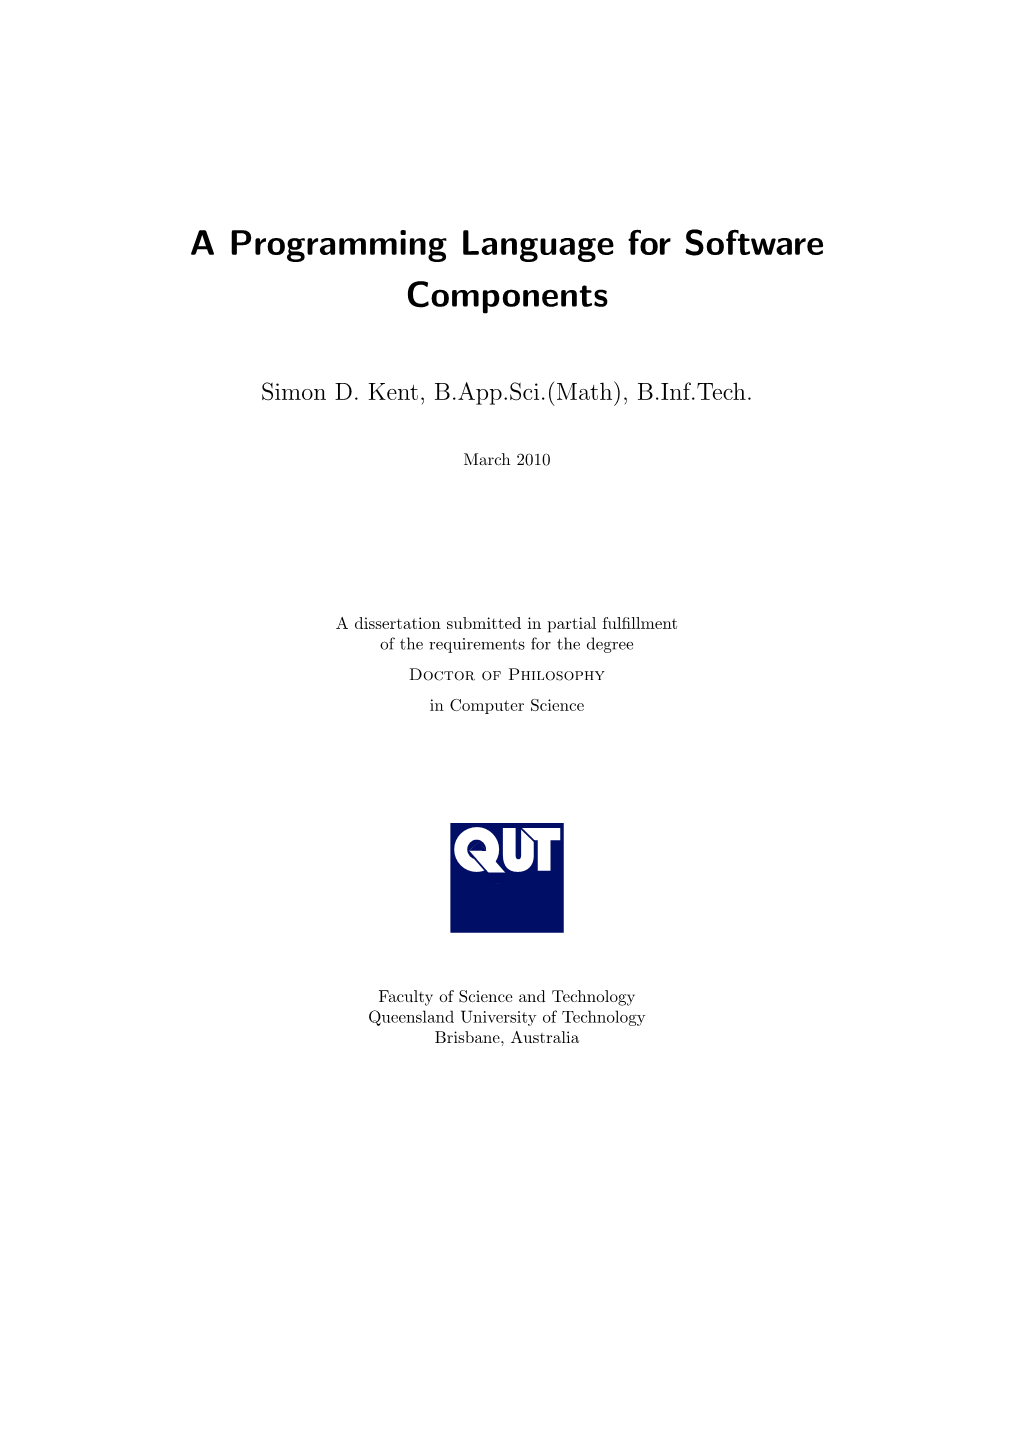 A Programming Language for Software Components Pdfauthor